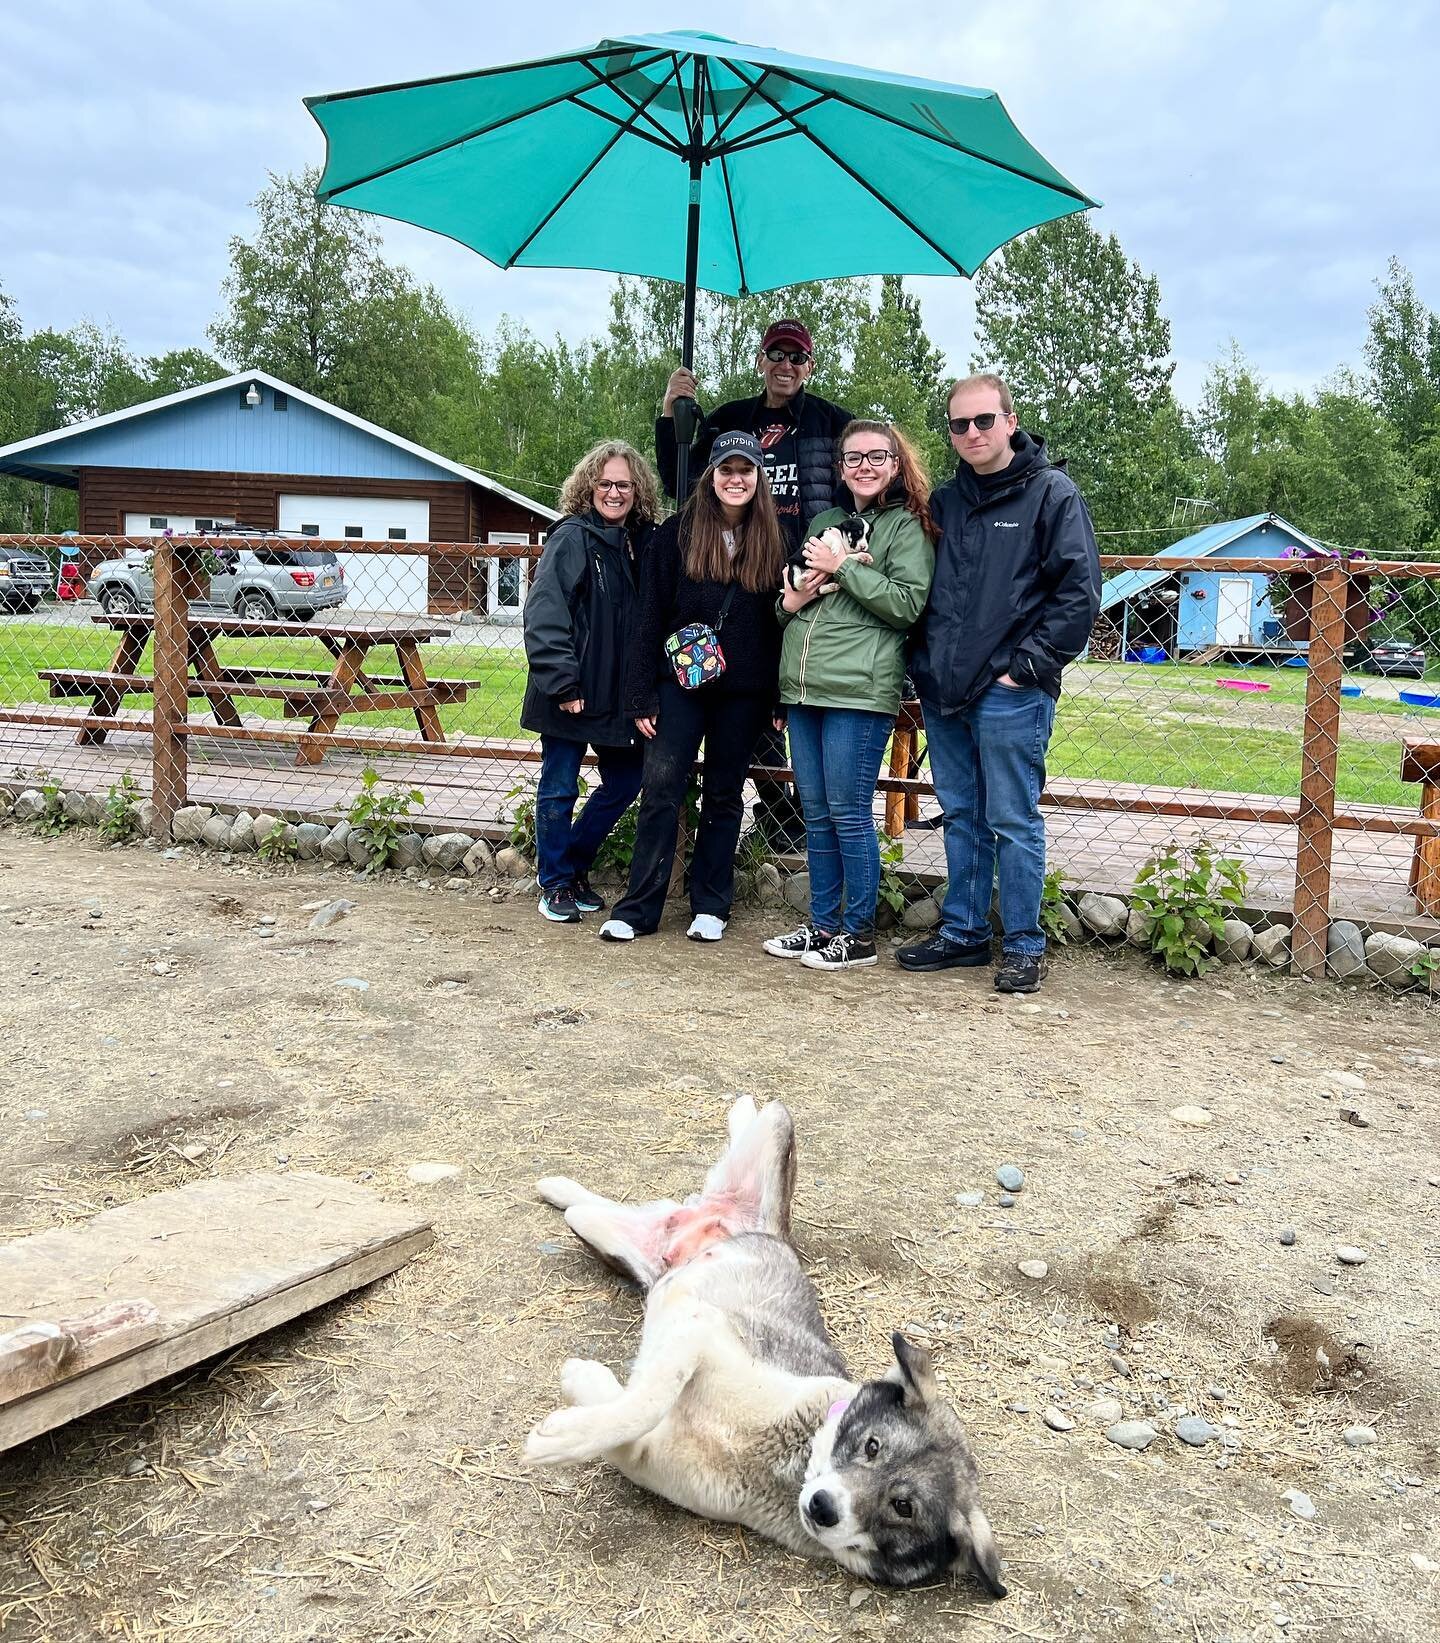 Thx to Becky Hacker we have a puppy for our guests to cuddle and help socialize! Ventana gave birth to a solo female pup named Thora and are guests can&rsquo;t get enough of her! 
🤗 😊 🥰 Ventana doesn&rsquo;t seem to mind 😂 @17thdog #alaska #alask